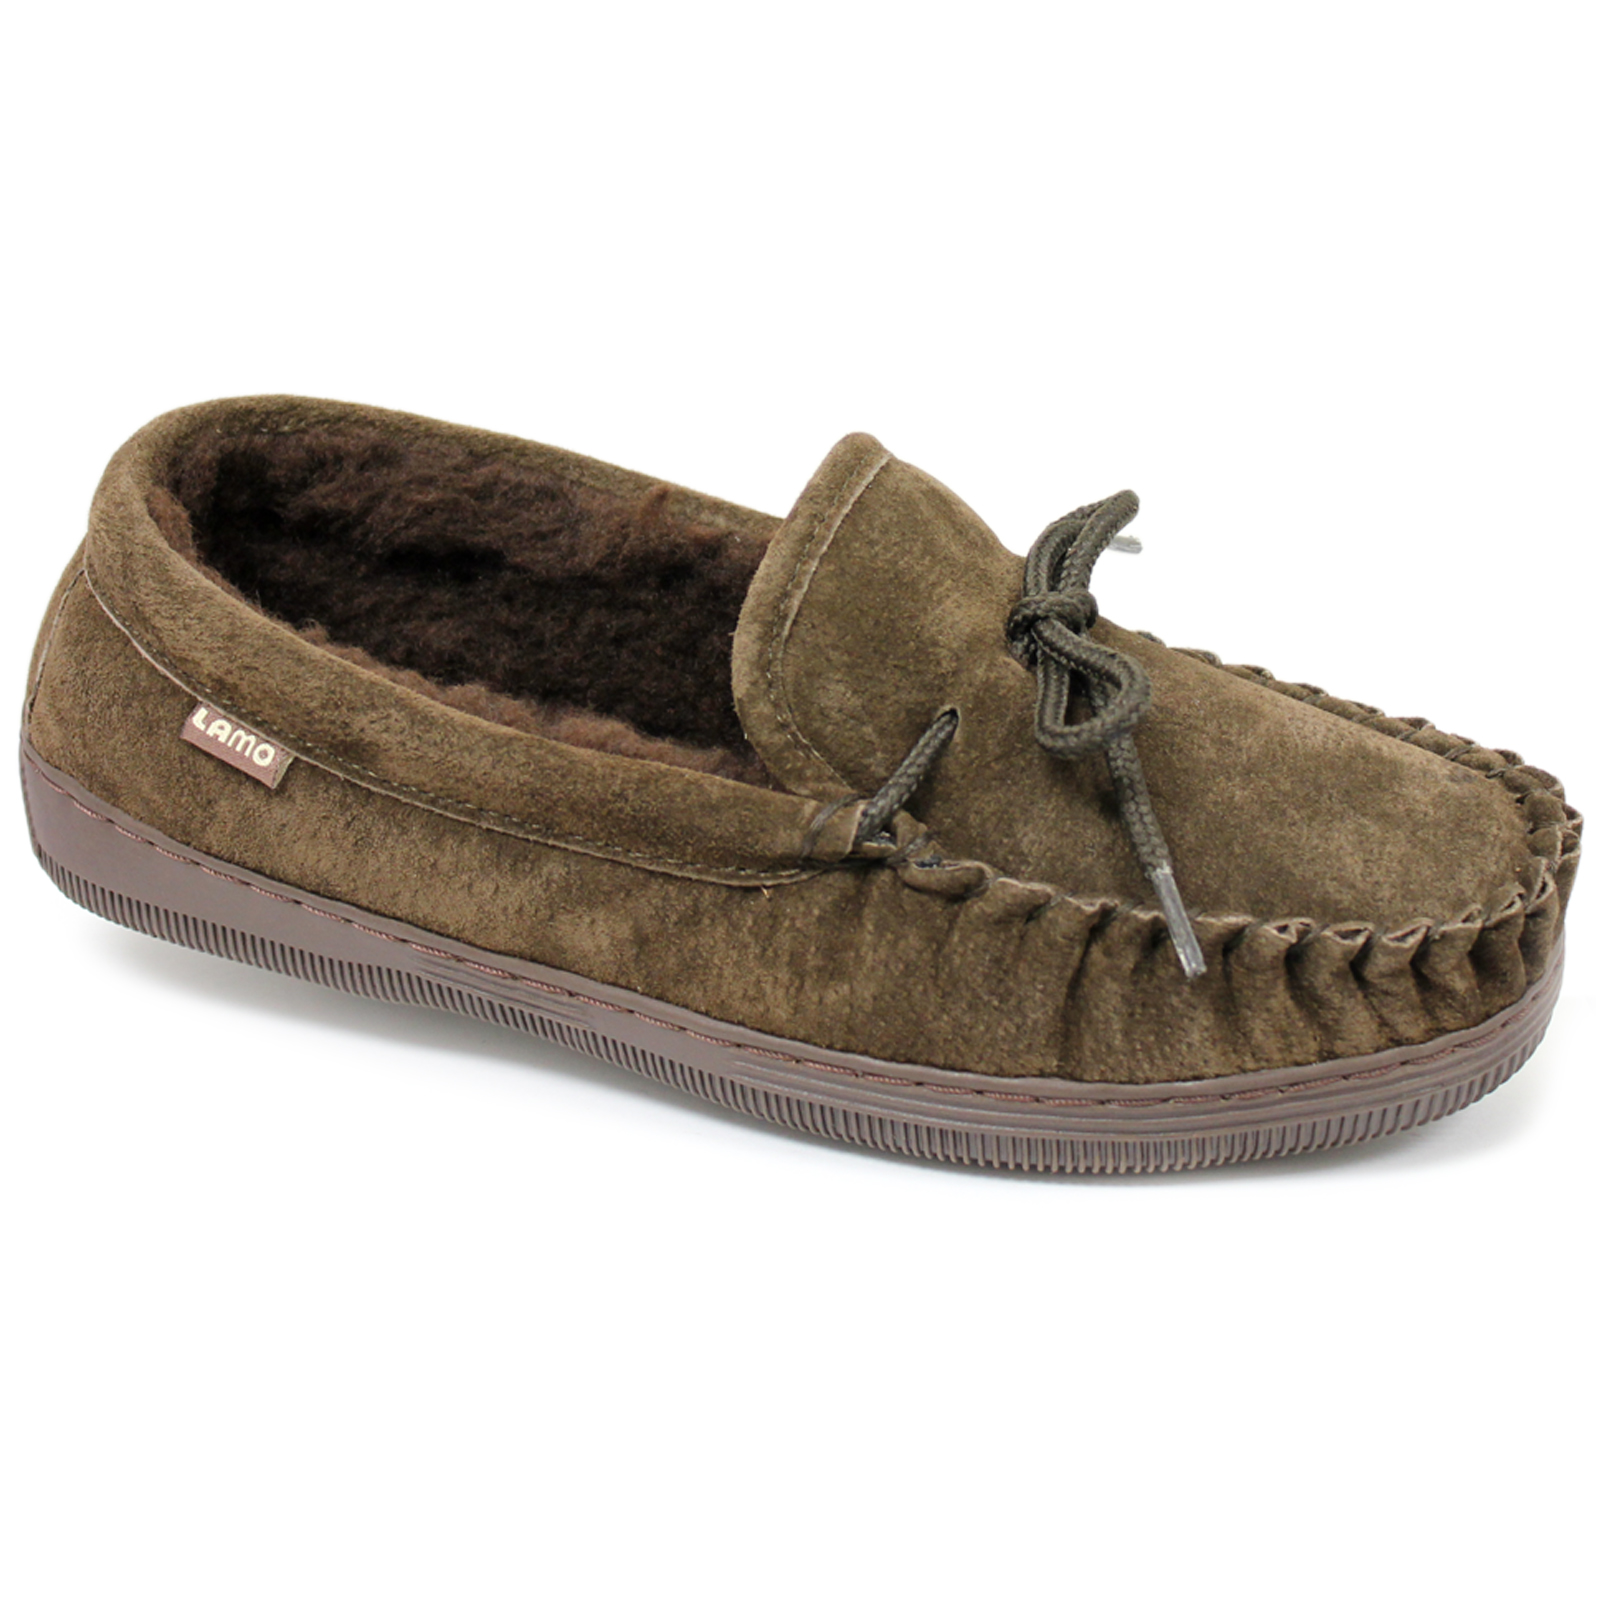 LAMO Lady's Faux Shearling Comfy Moccasin